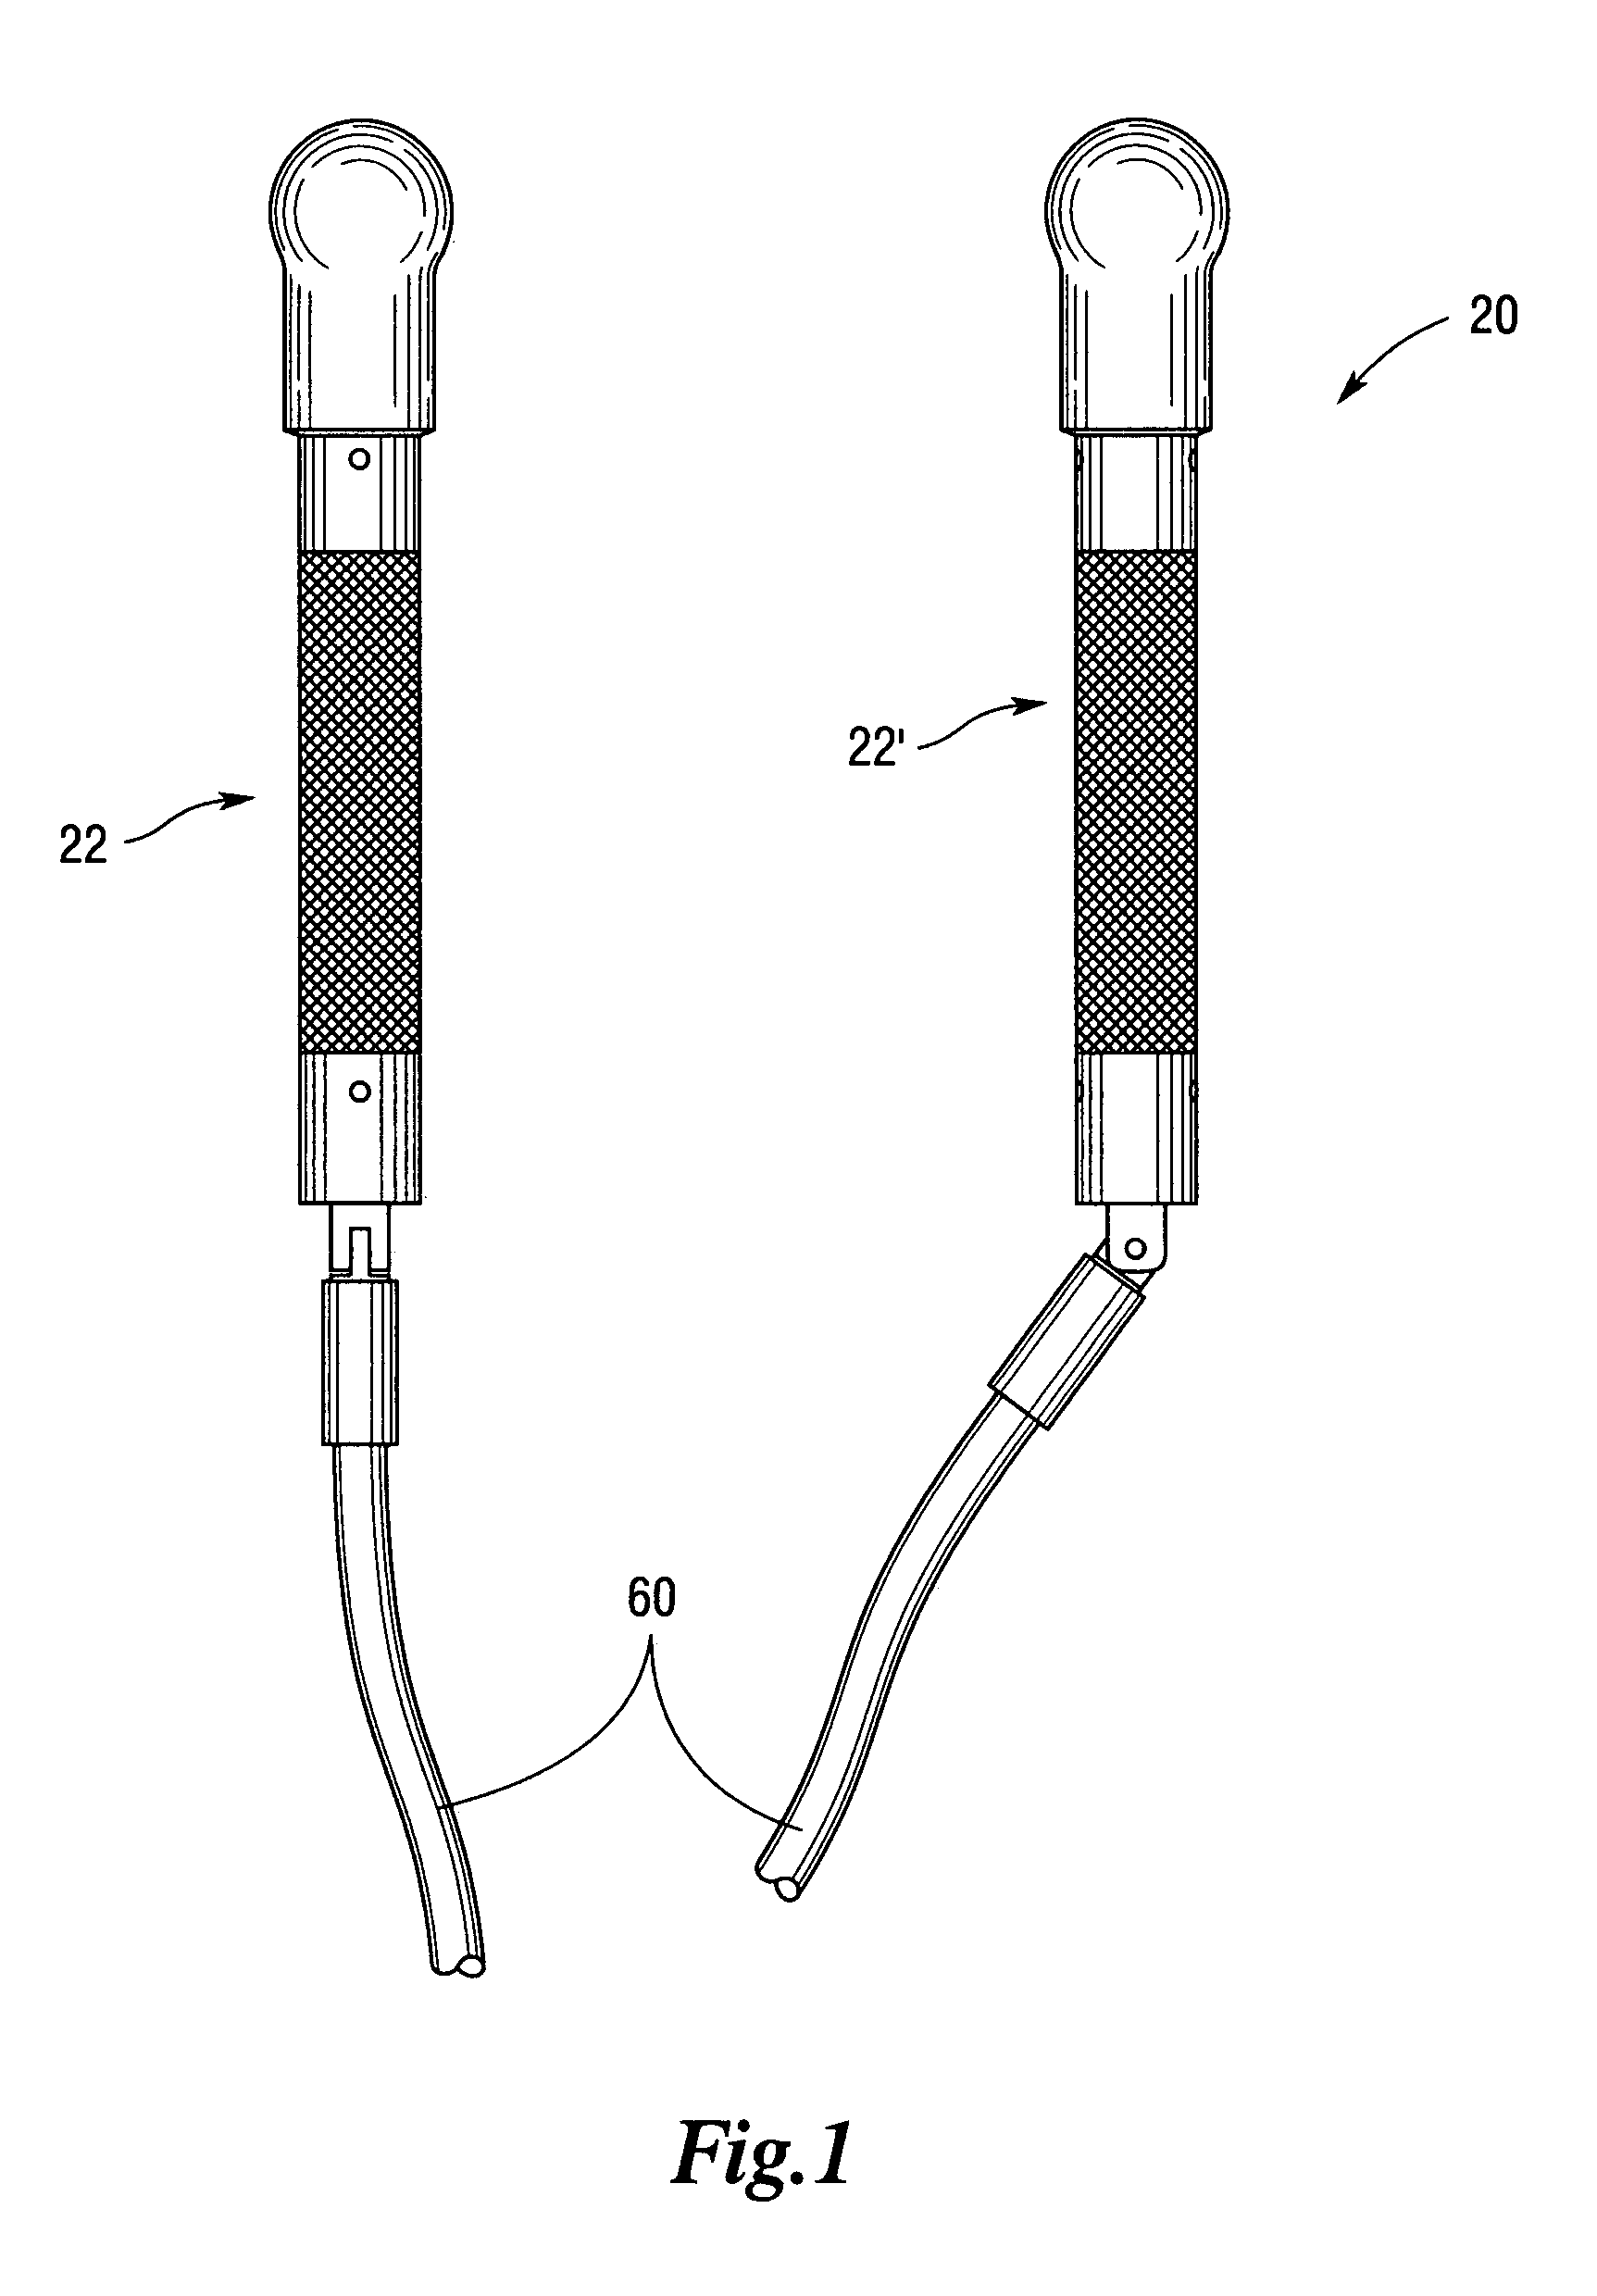 Method and apparatus for kinesthetic body conditioning